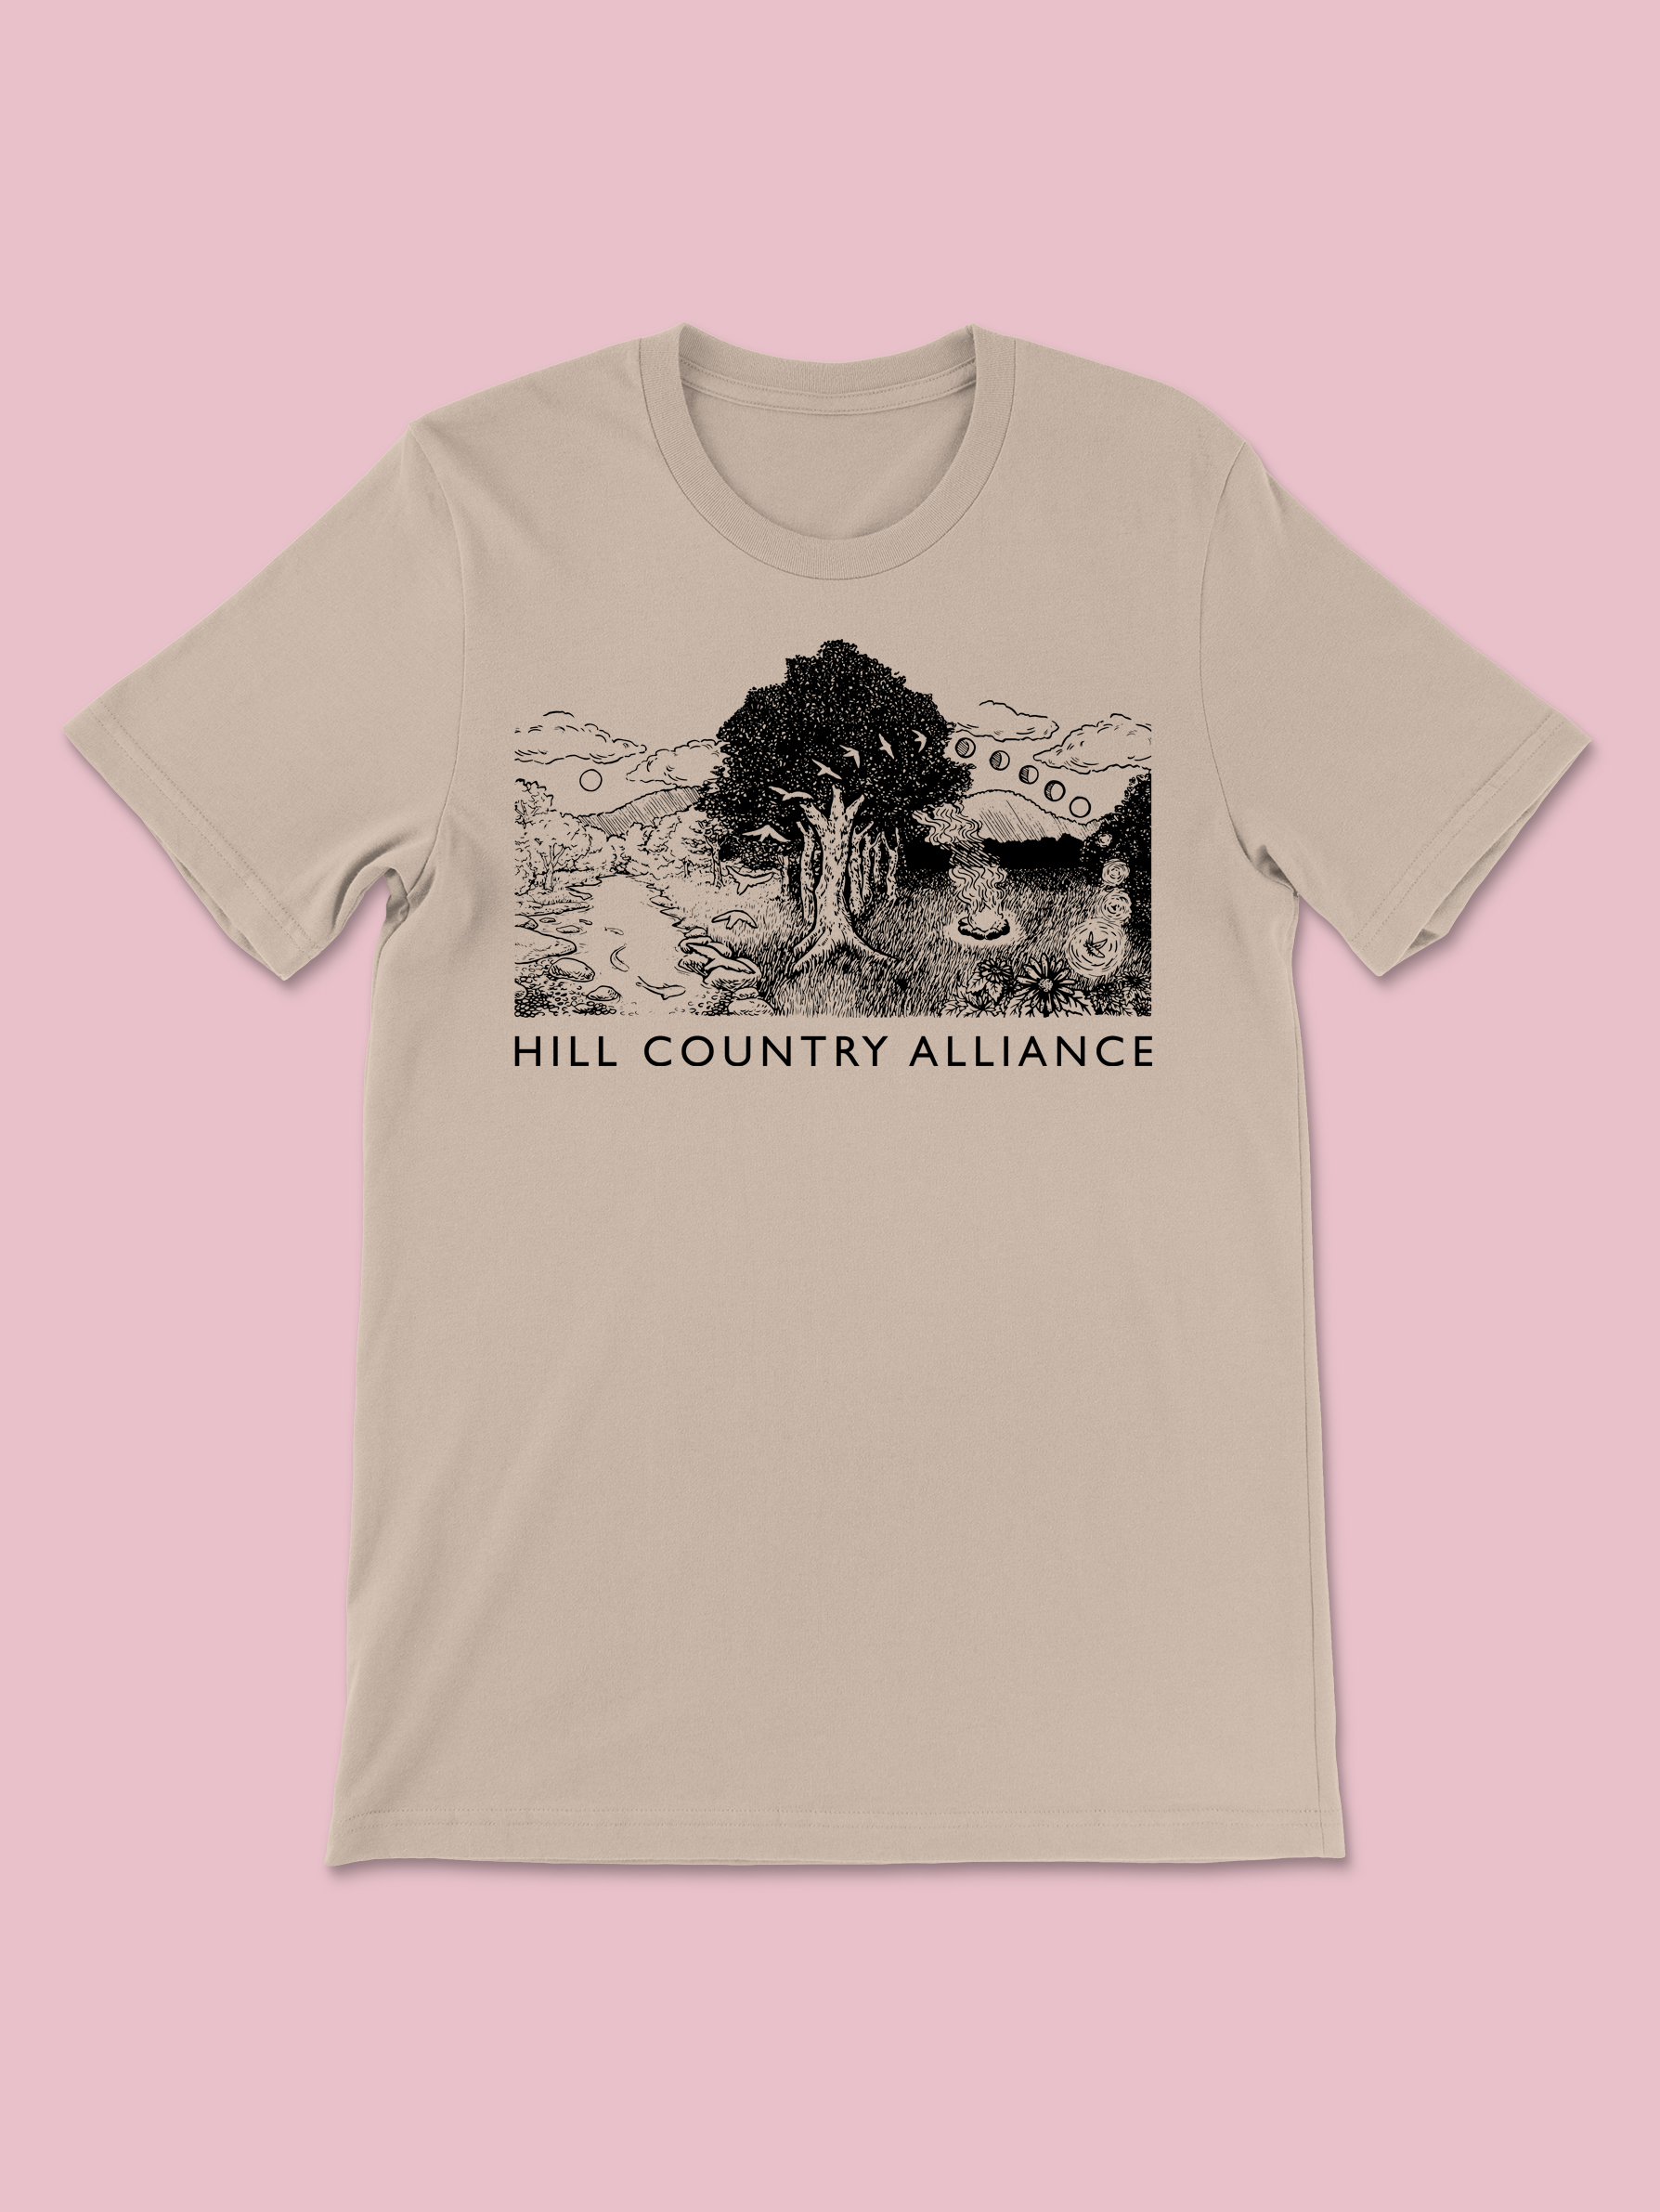 Hill Country Alliance Limited Edition Design – Meet The Artist: Olivia Gray